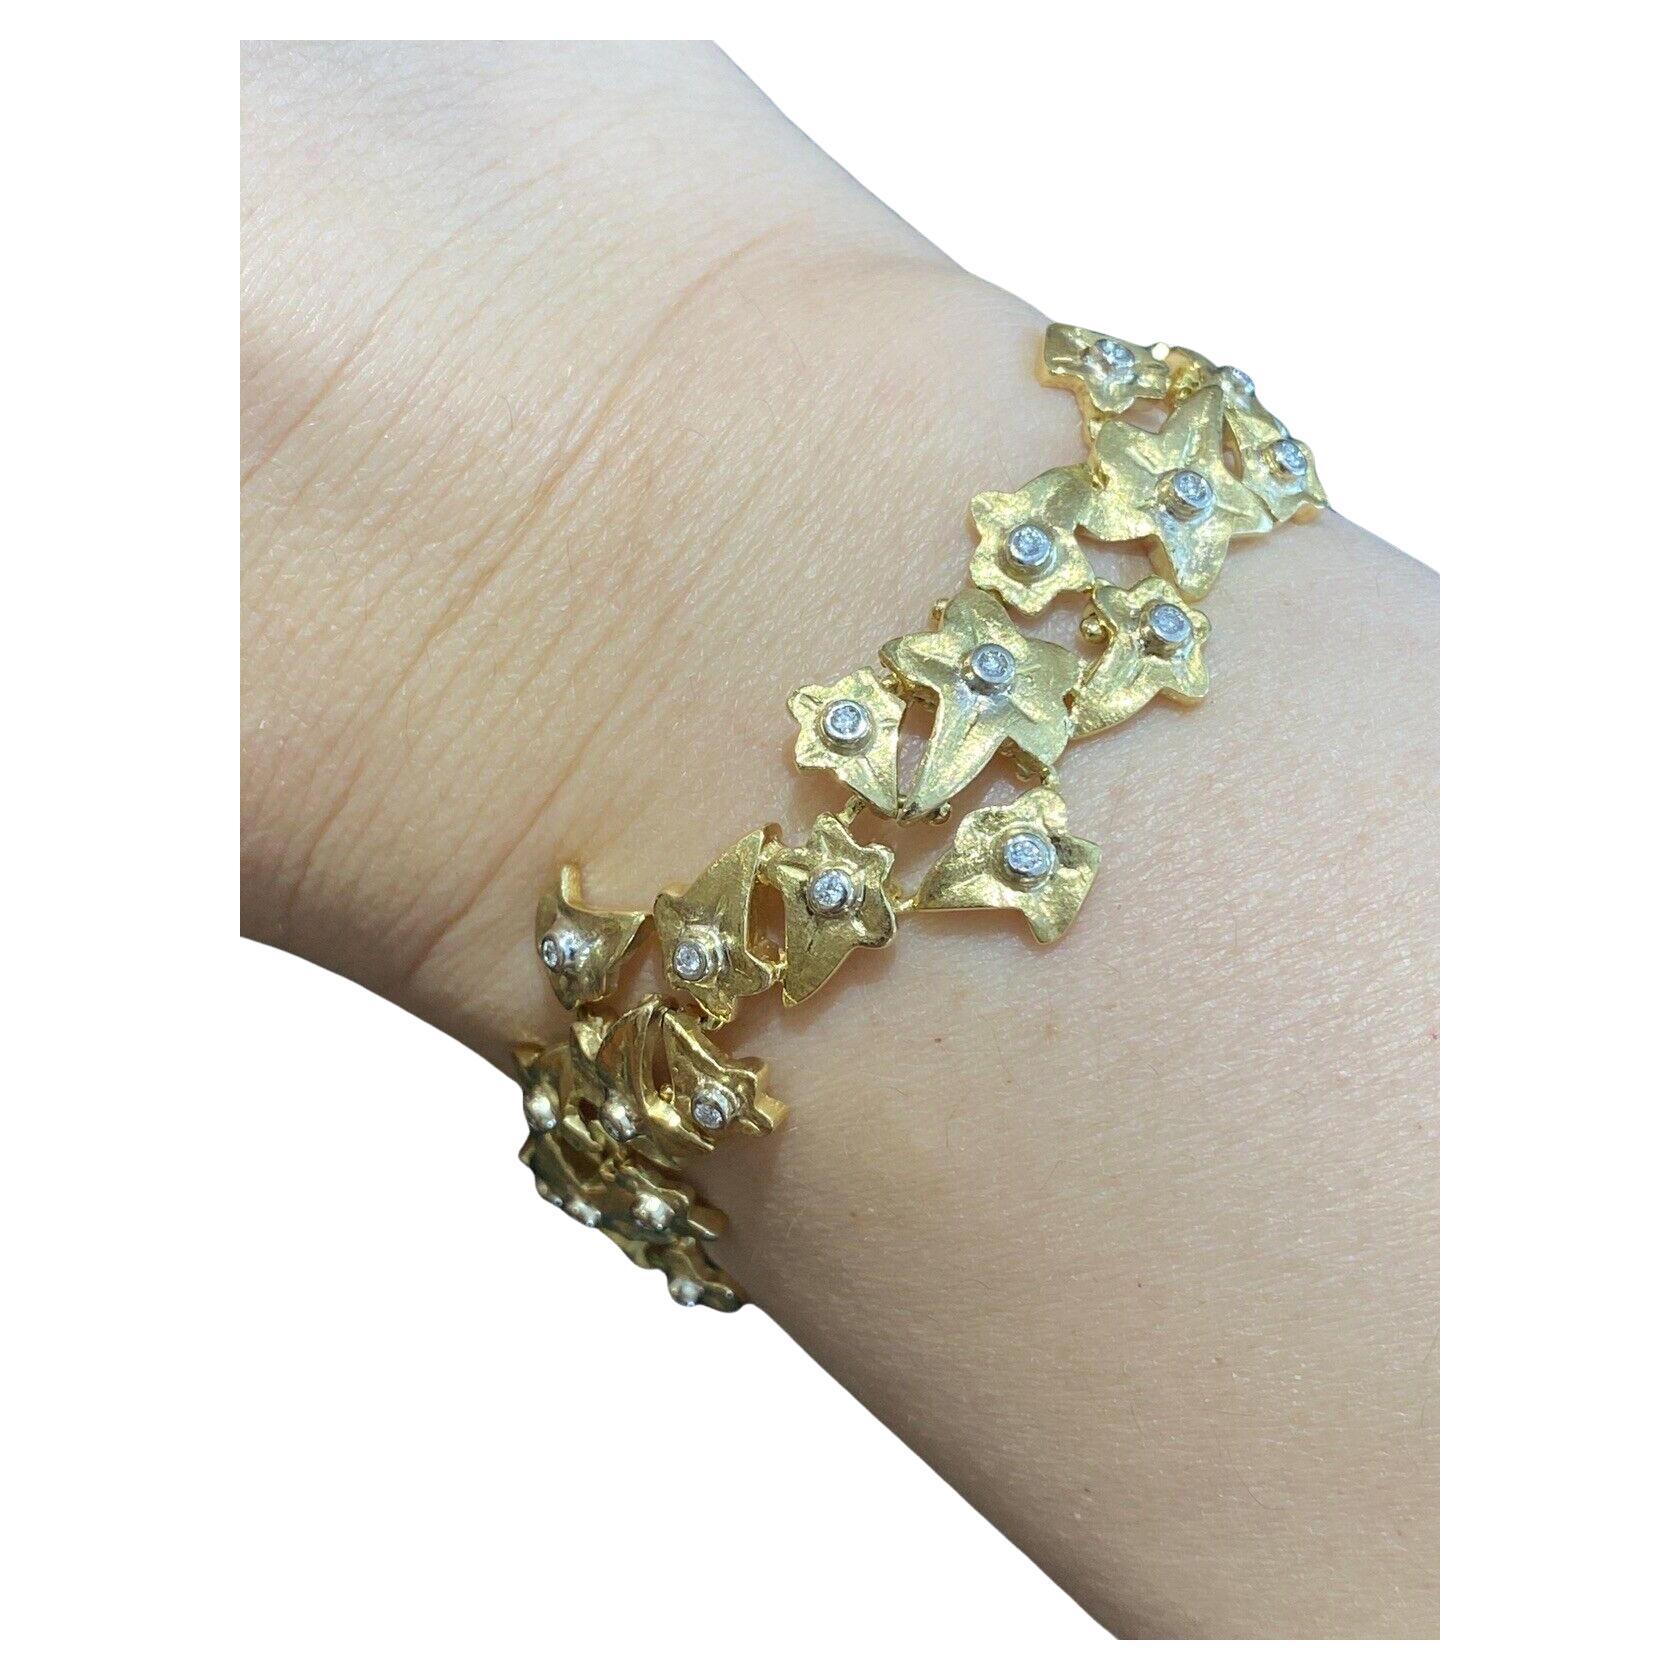 Vintage ROBERTO COIN Leaf Diamond Bracelet in 18k Yellow Gold

Leaf Diamond Bracelet by Roberto Coin features 39 Round Brilliant cut Diamonds set in 18k Yellow Gold.

Total diamond weight is 0.60 carats. 
The diamond quality ranges from VS-SI1 in